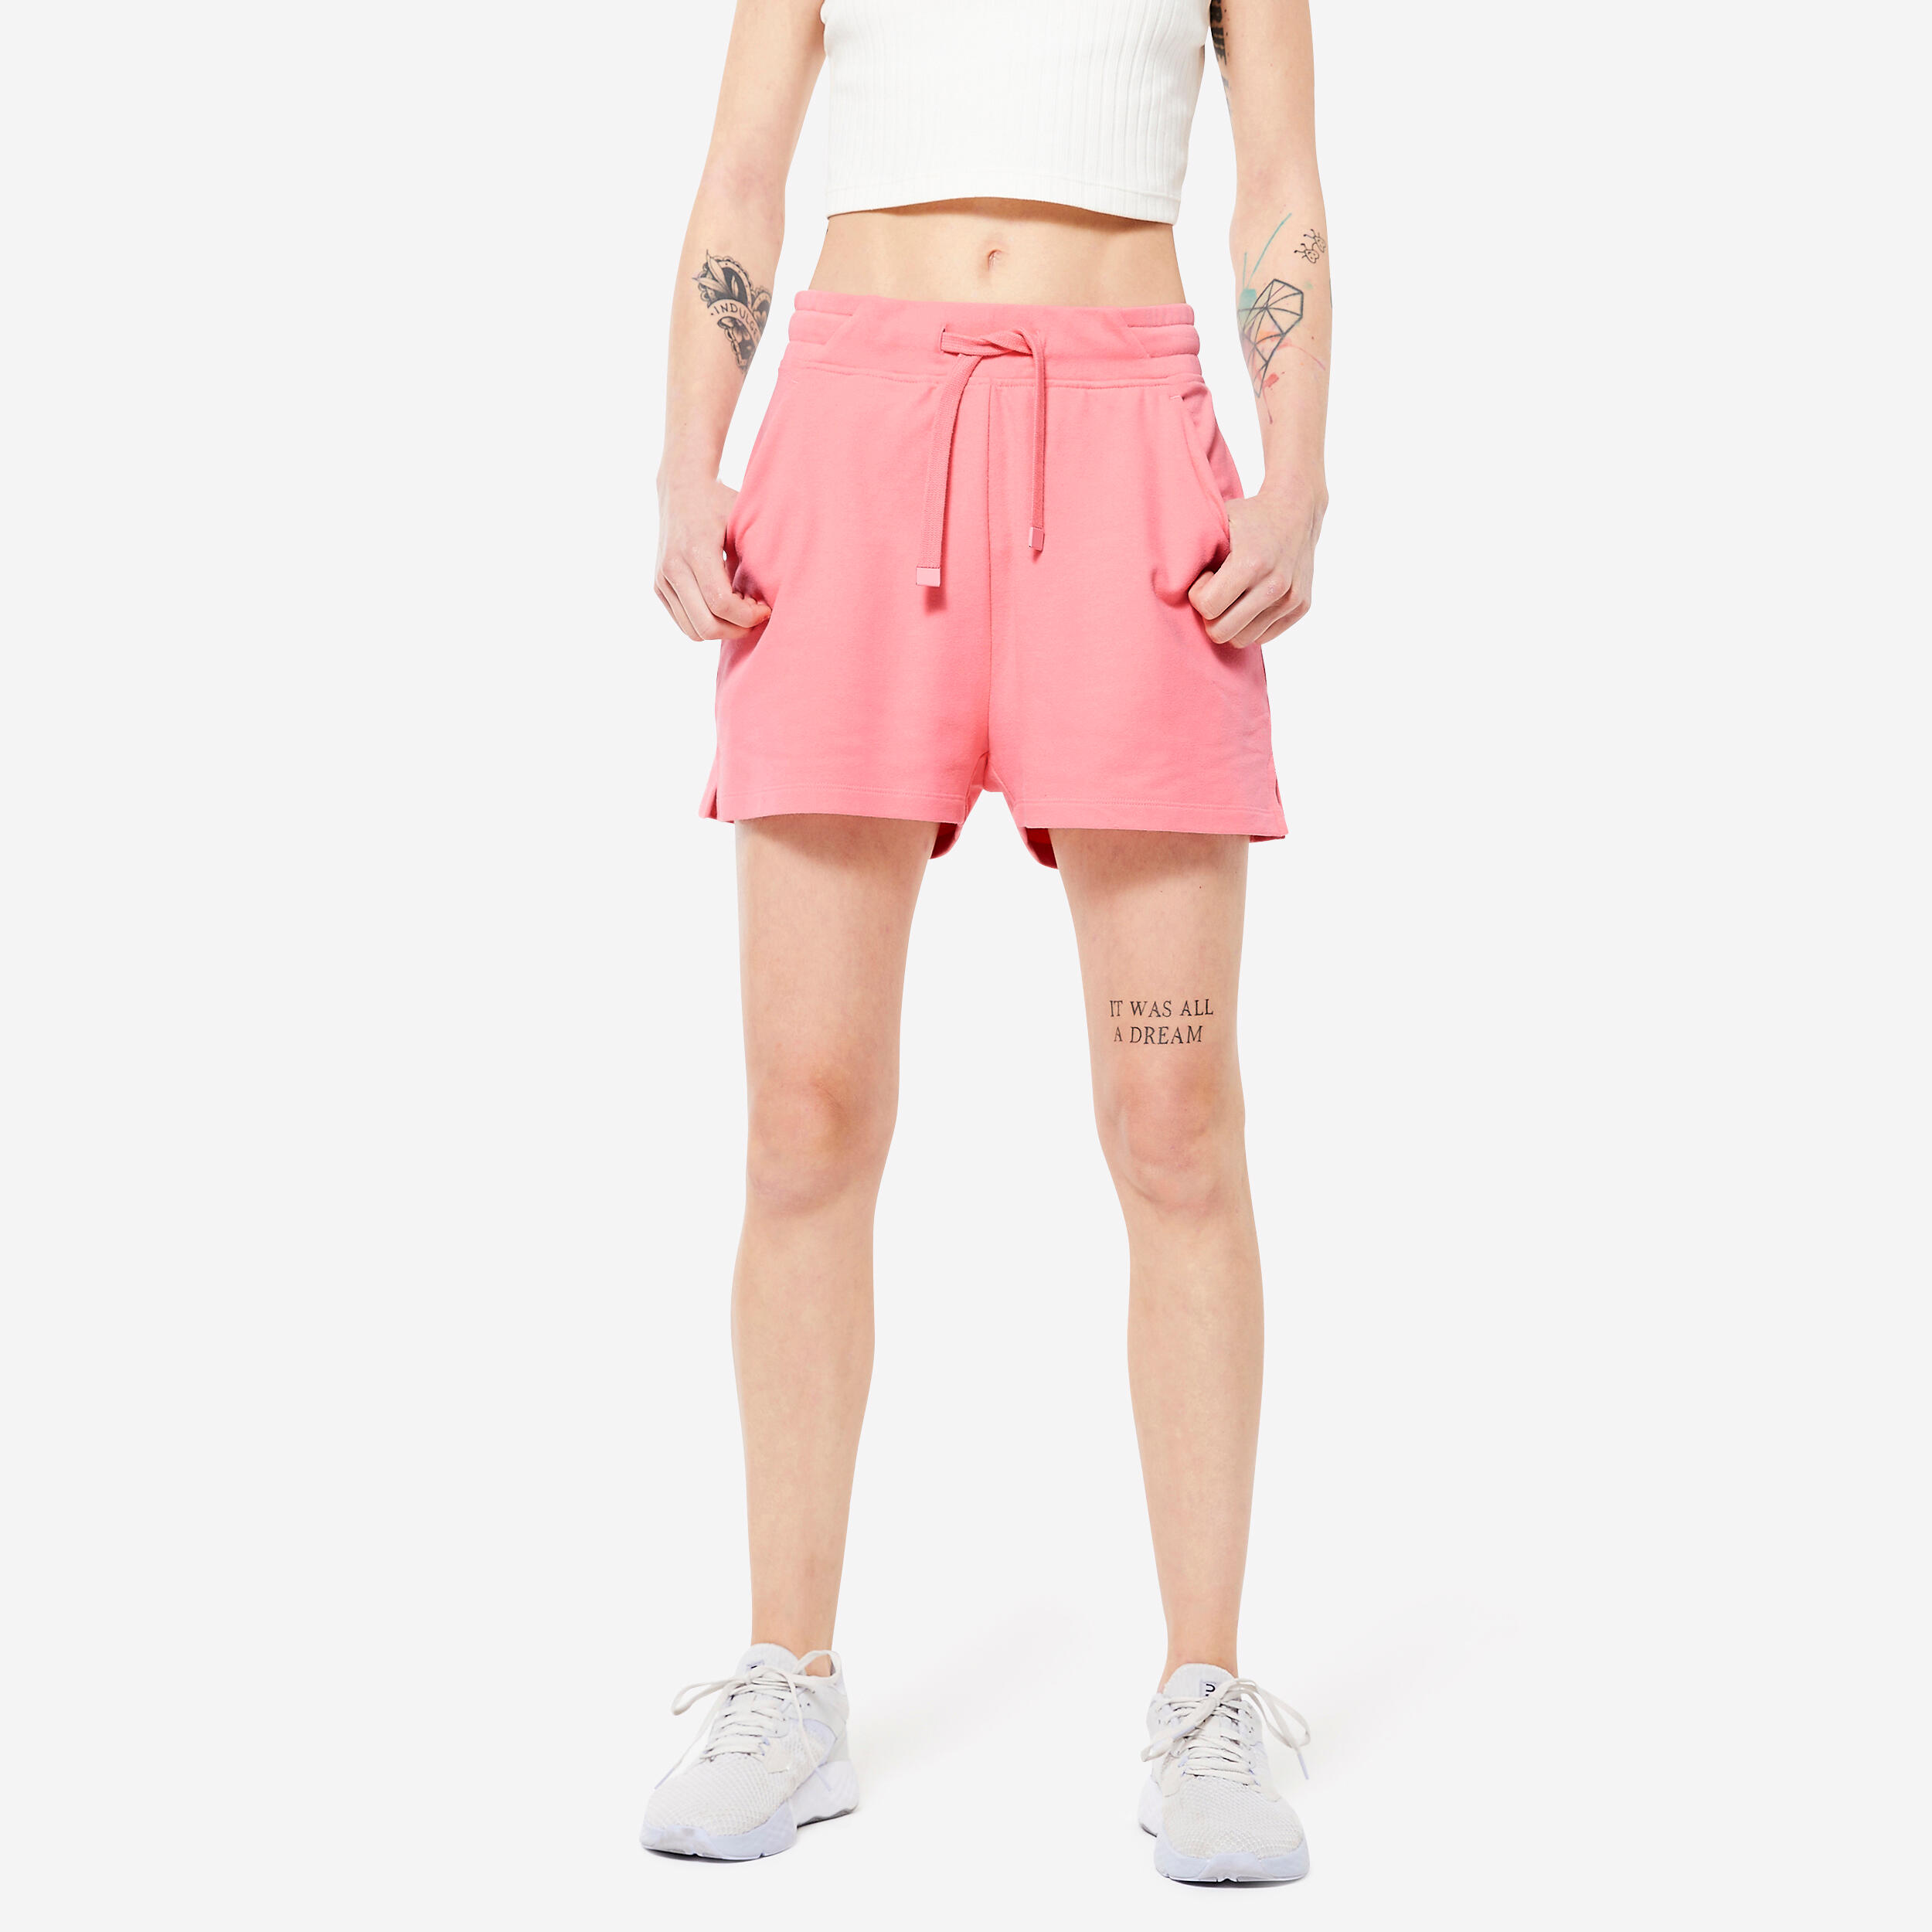 DOMYOS Women's Cotton Fitness Shorts with Pocket 520 - Pink Lychee